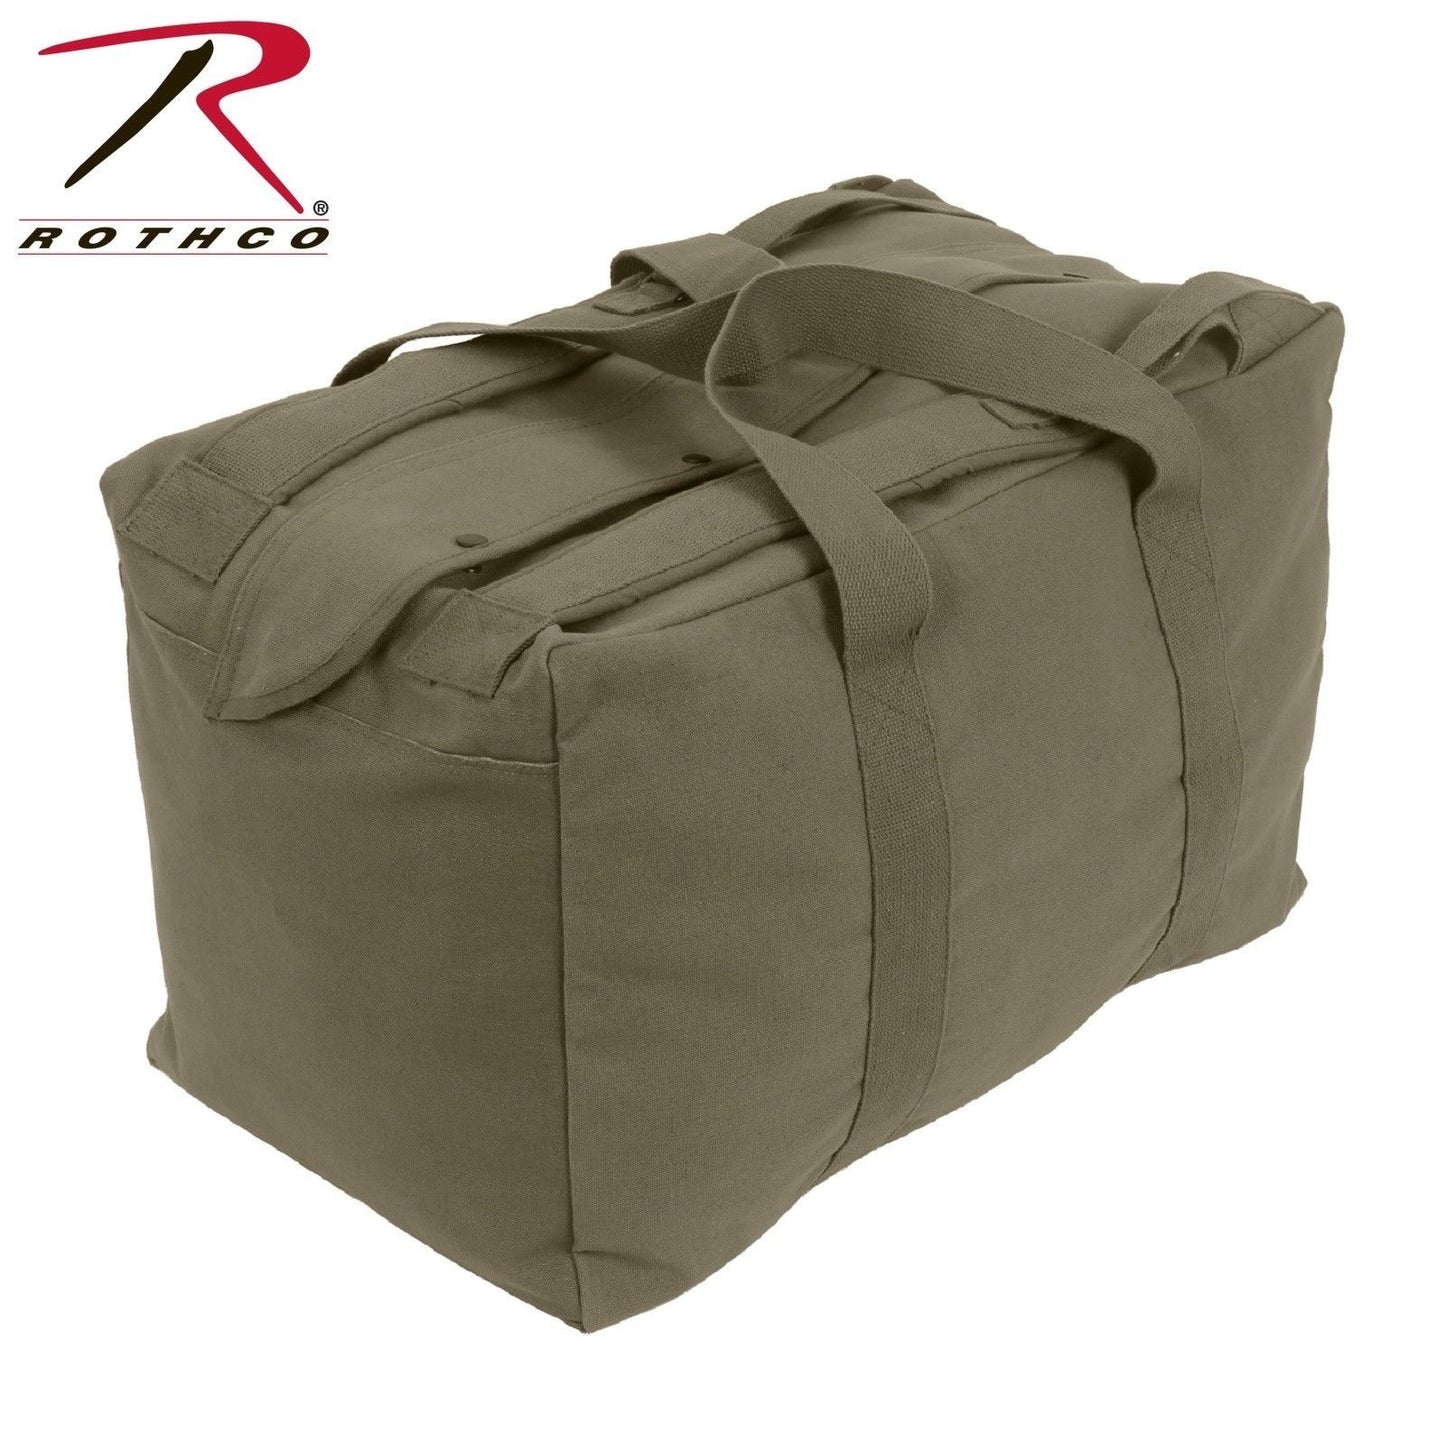 Olive Drab Tactical Canvas Duffle Bag - Rothco Canvas Mossad Type Cargo Bag